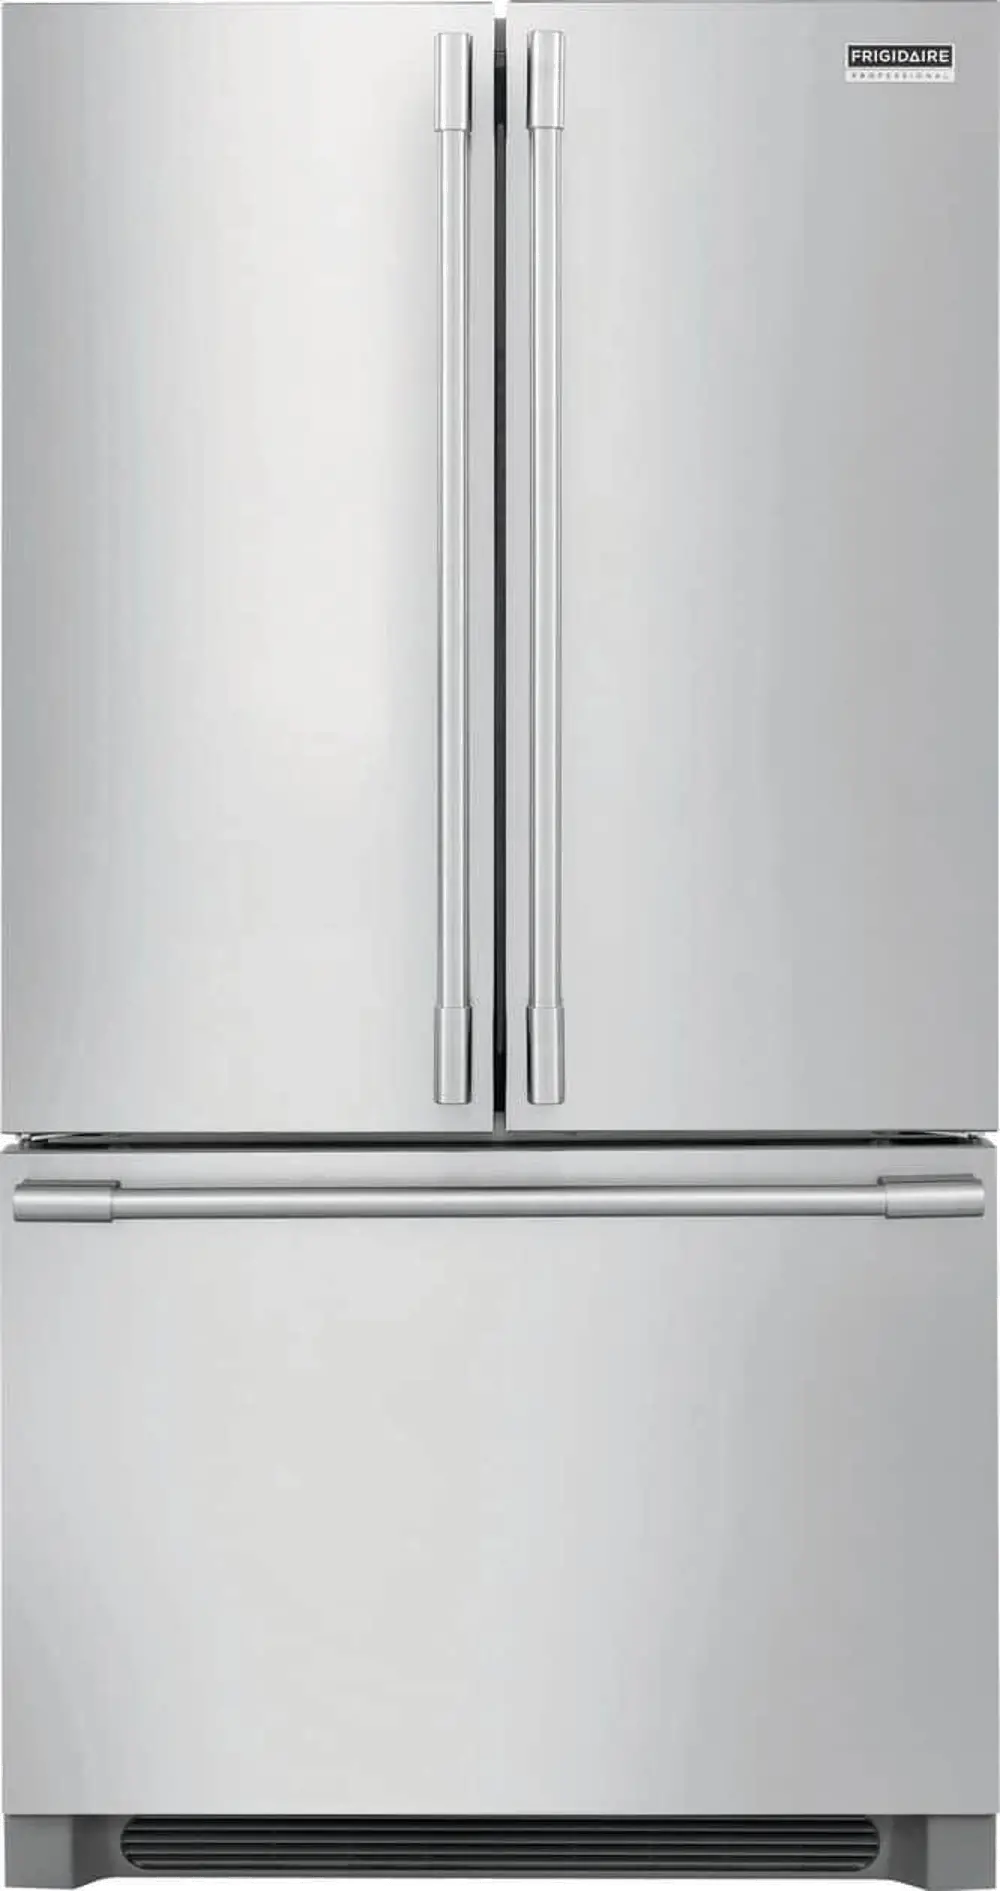 FPBG2278UF Frigidaire Professional French Door Refrigerator - 22.3 cu. ft., 36 Inch Counter Depth Stainless Steel-1